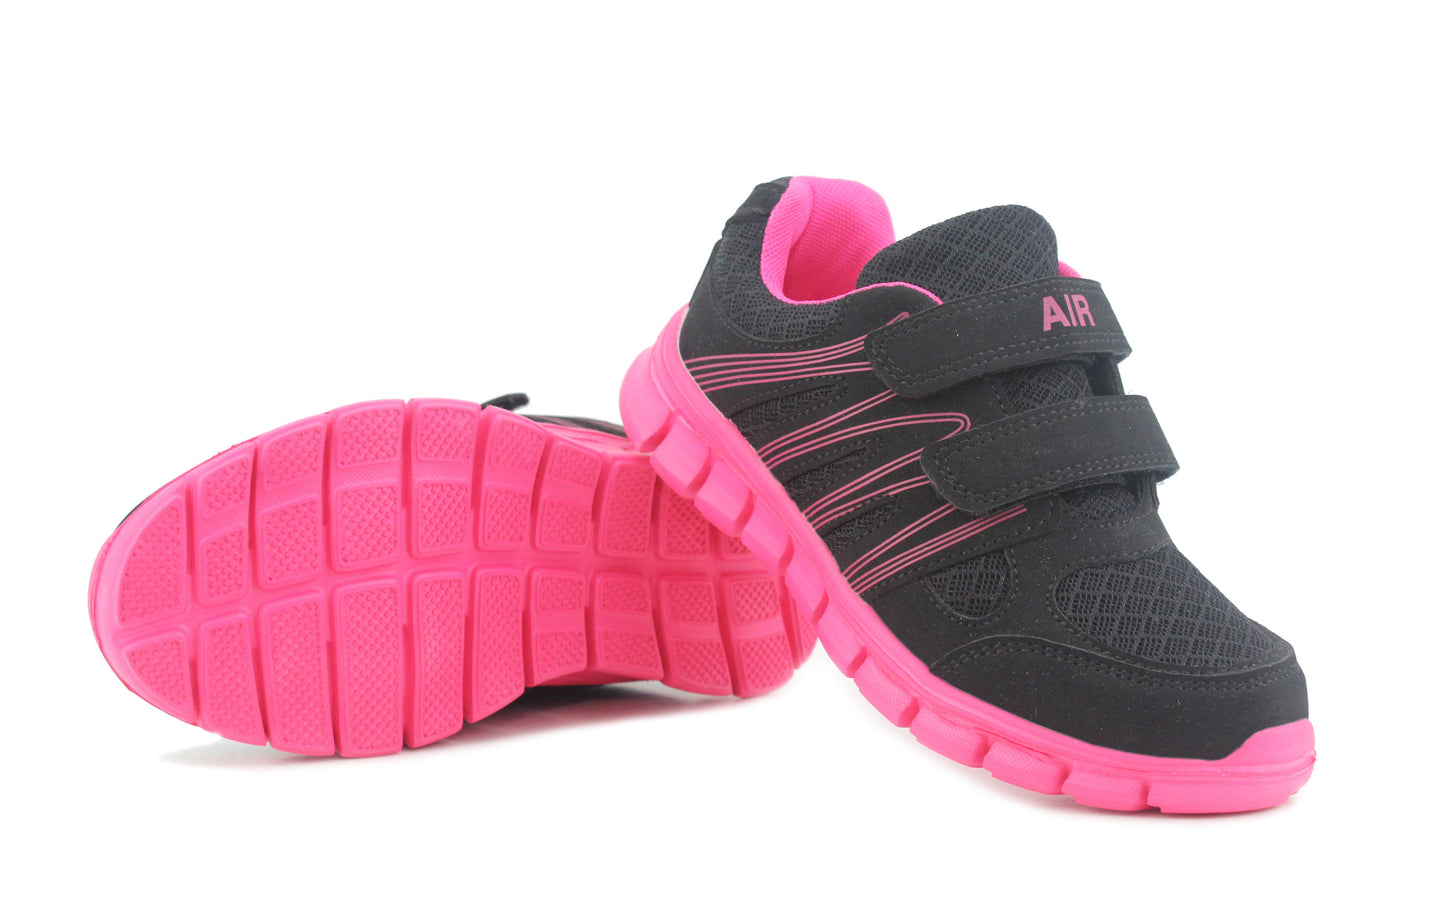 Kids Black Hot Pink Youth Super Lightweight EVA Double Touch Fasten Strap Sports Trainers